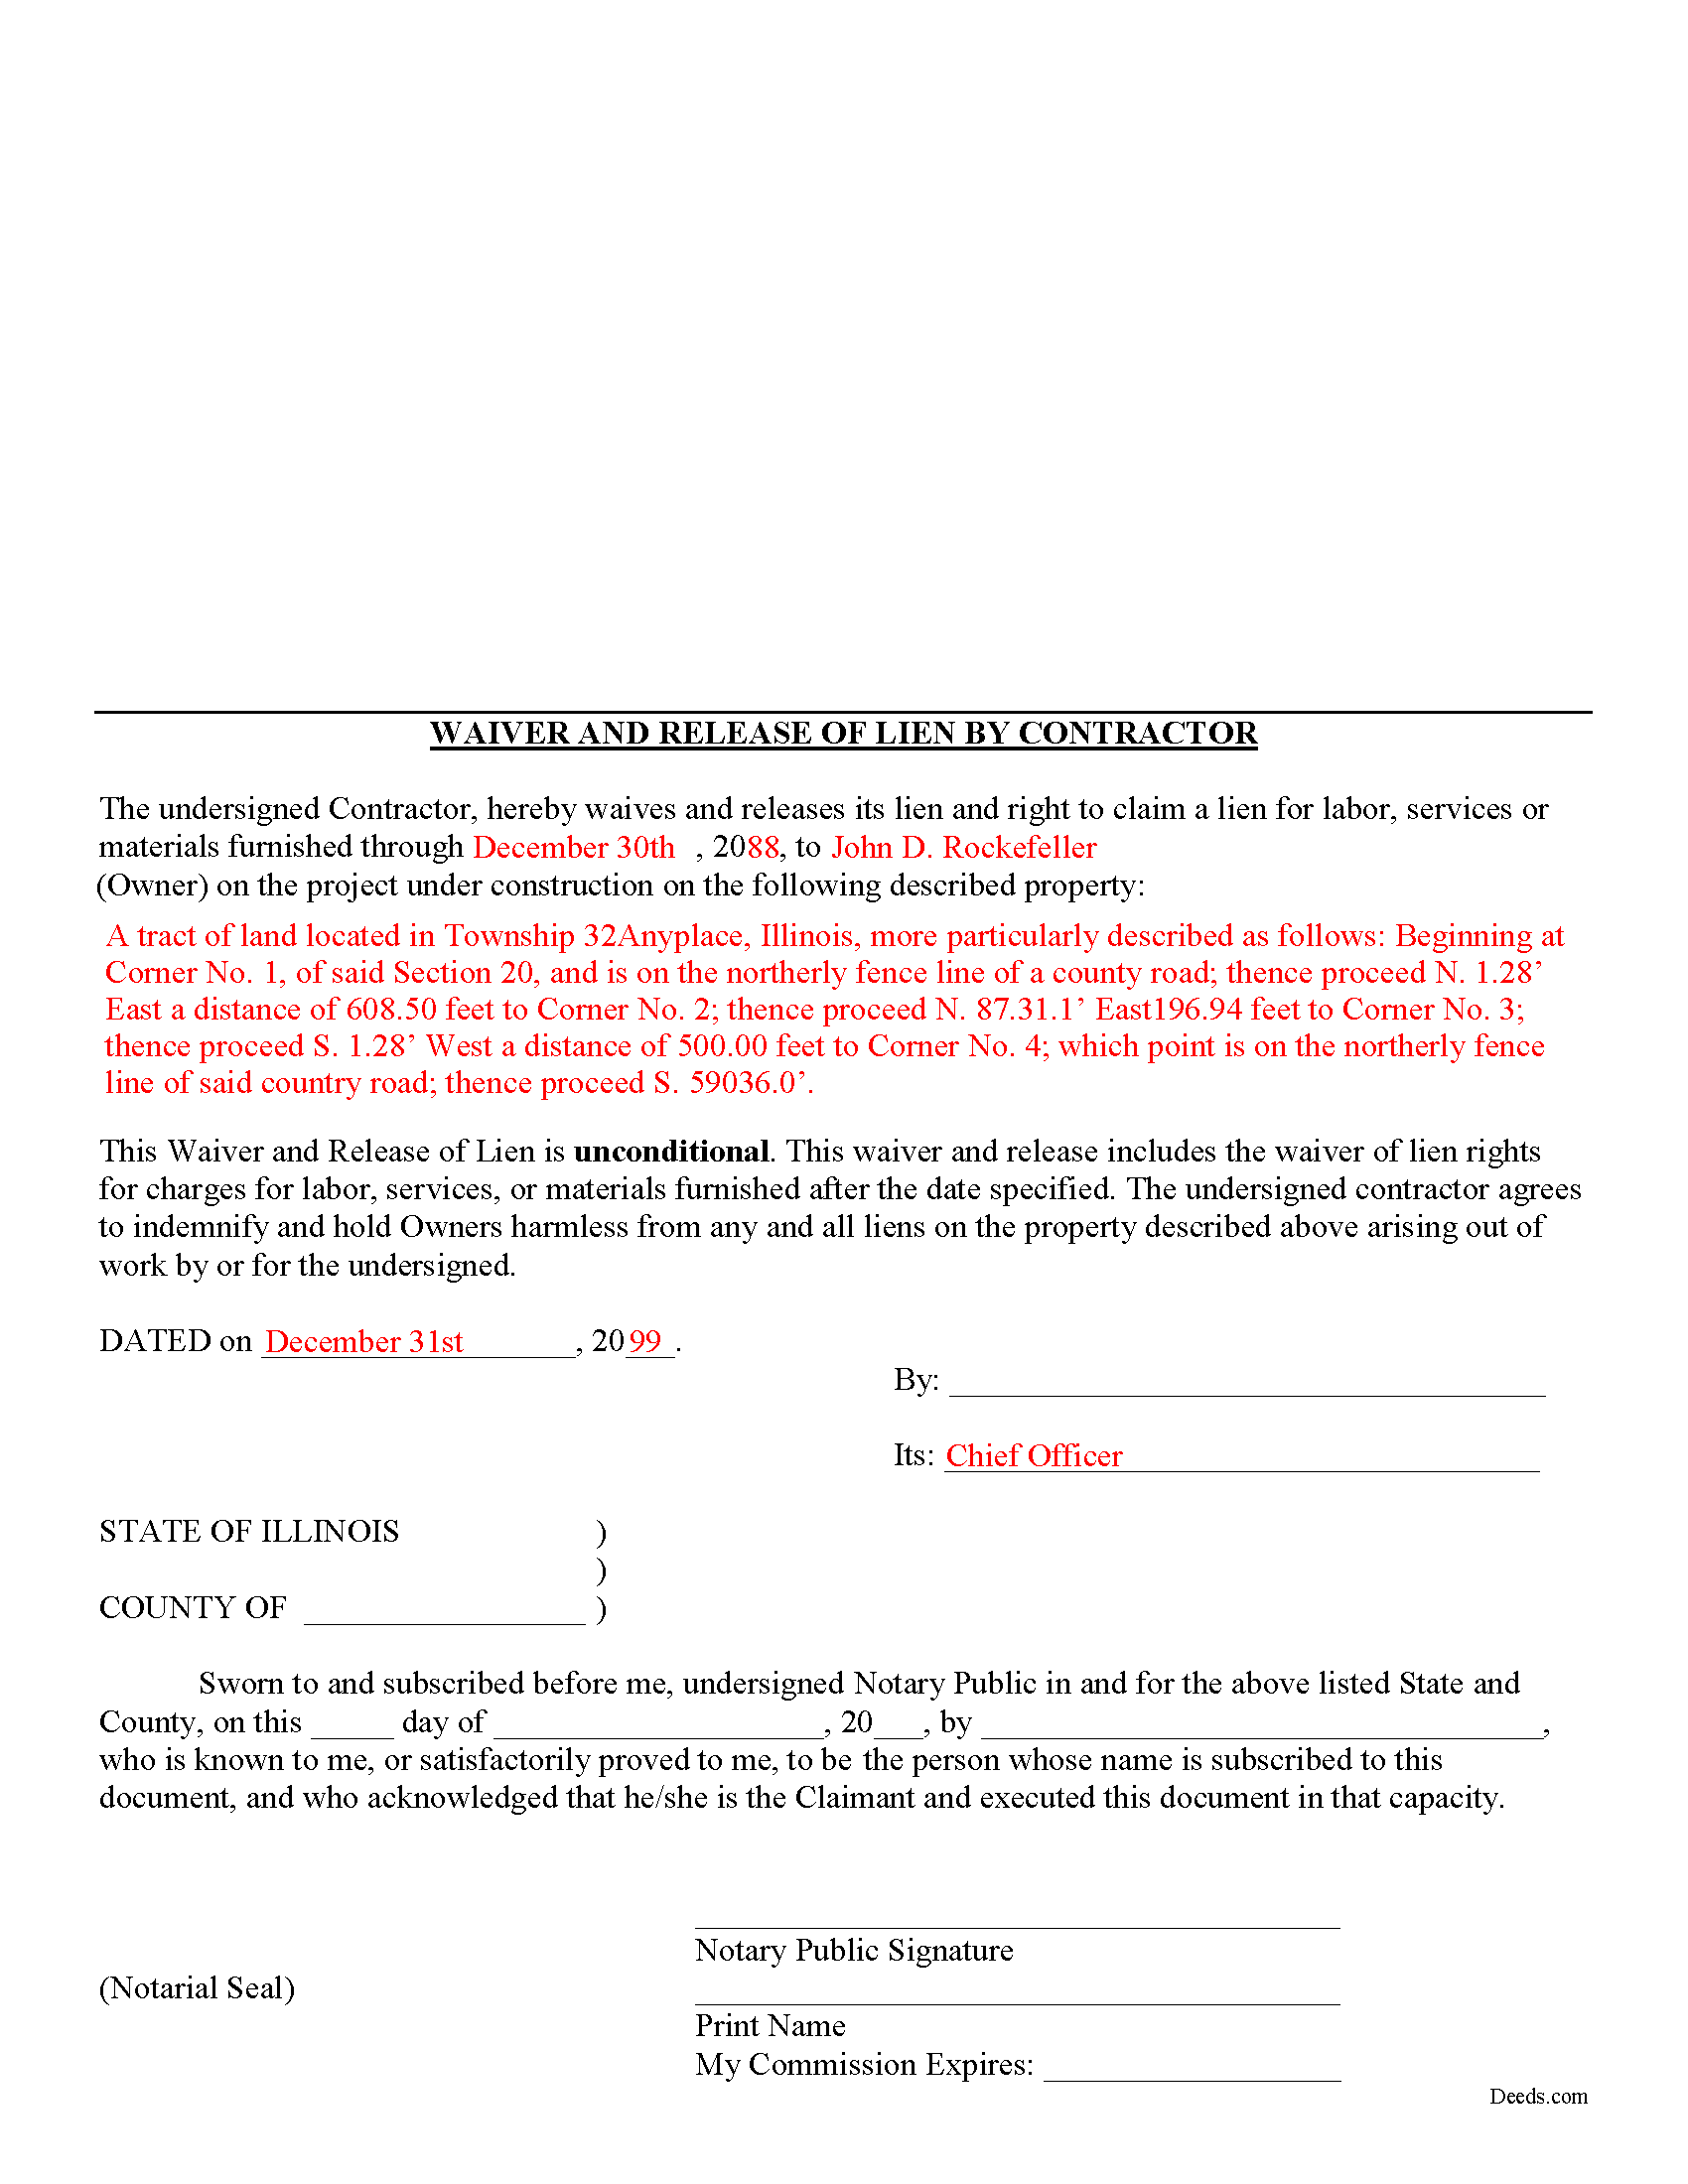 Completed Example of the Unconditional Waiver and Release of Mechanic Lien Document